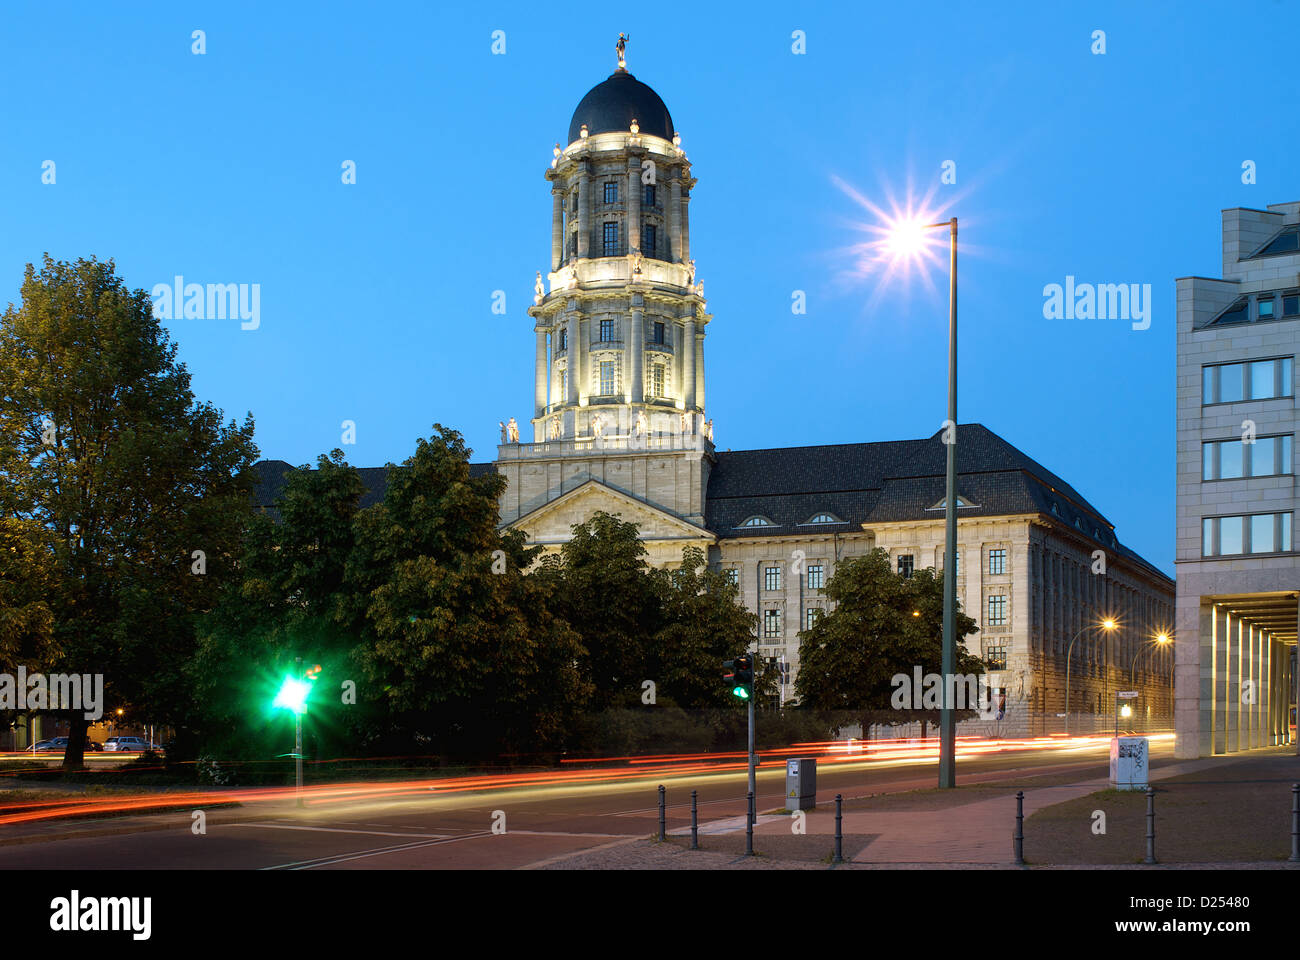 Berlin, Germany, old townhouse on the market for whey Daemmerung Stock Photo